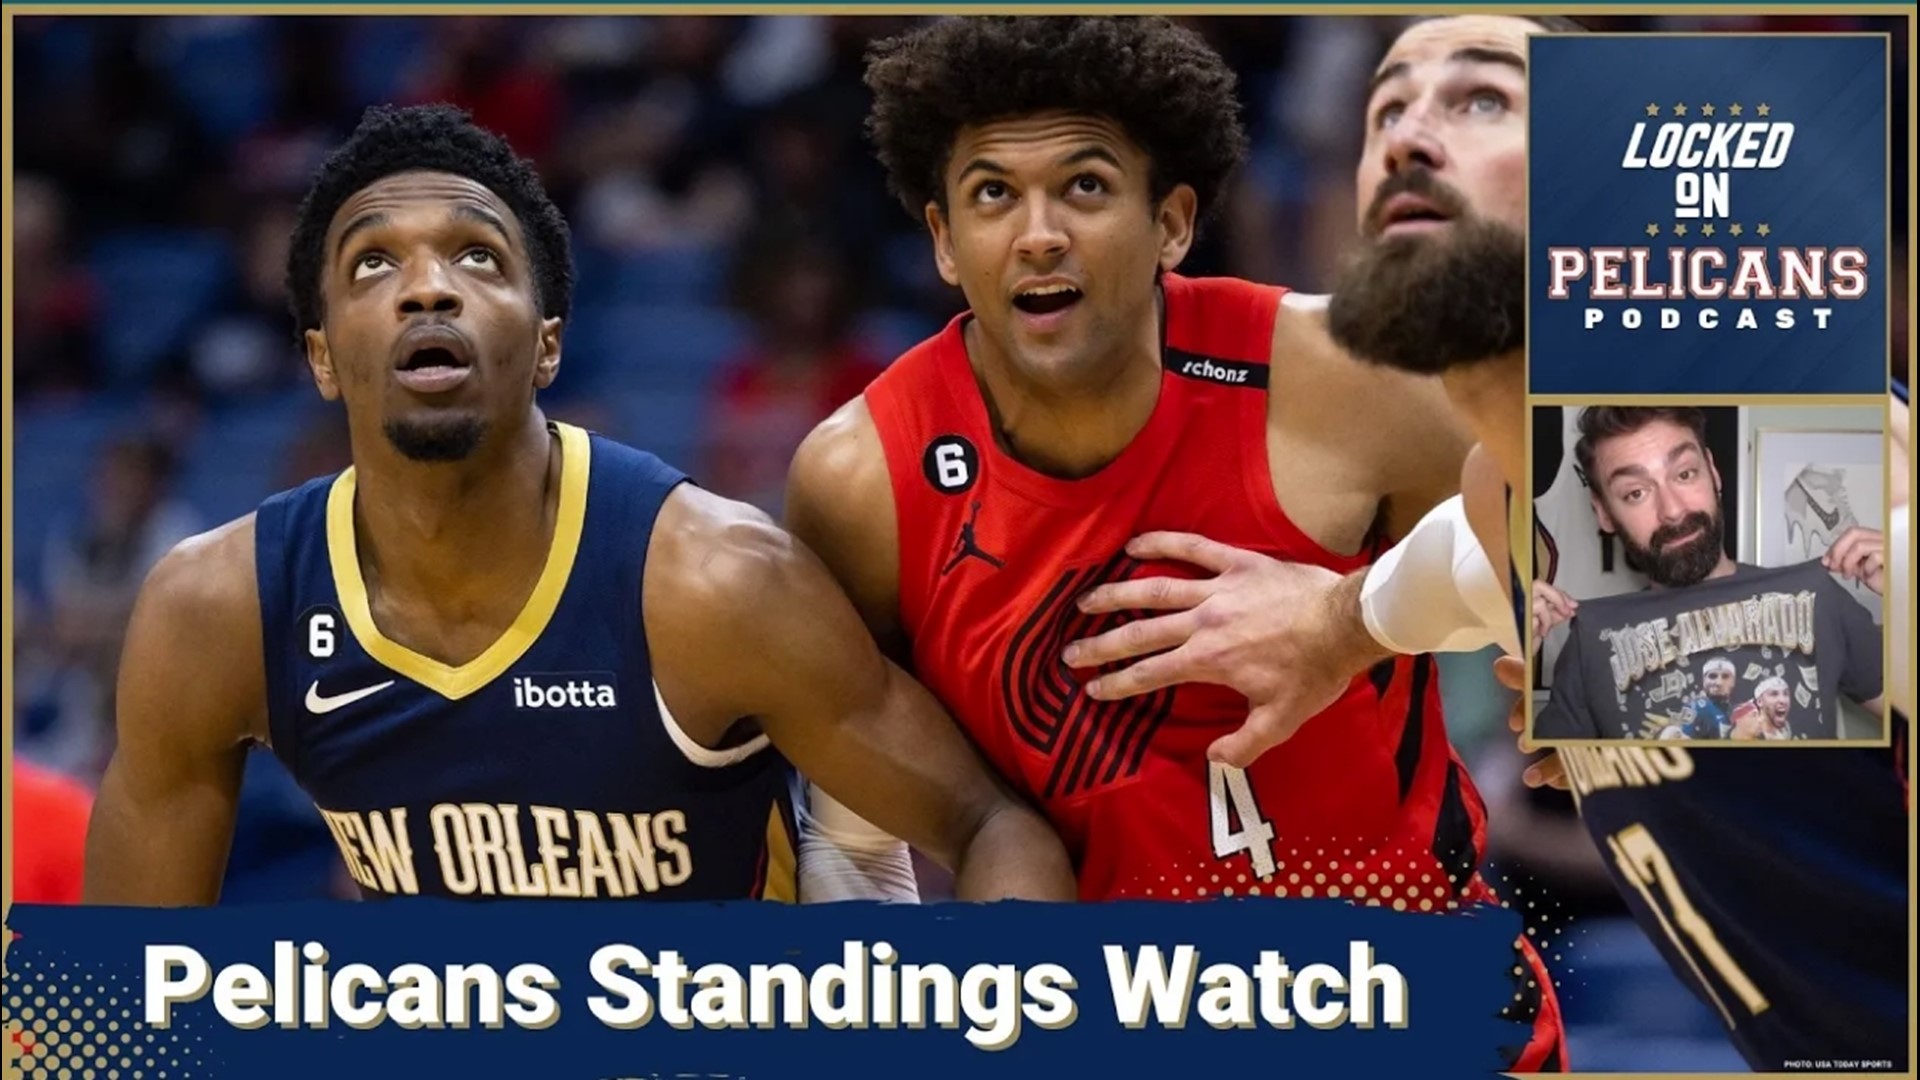 The New Orleans Pelicans are on the outside of the playoffs currently. Which teams are they hoping lose to give them a boost in the standings?